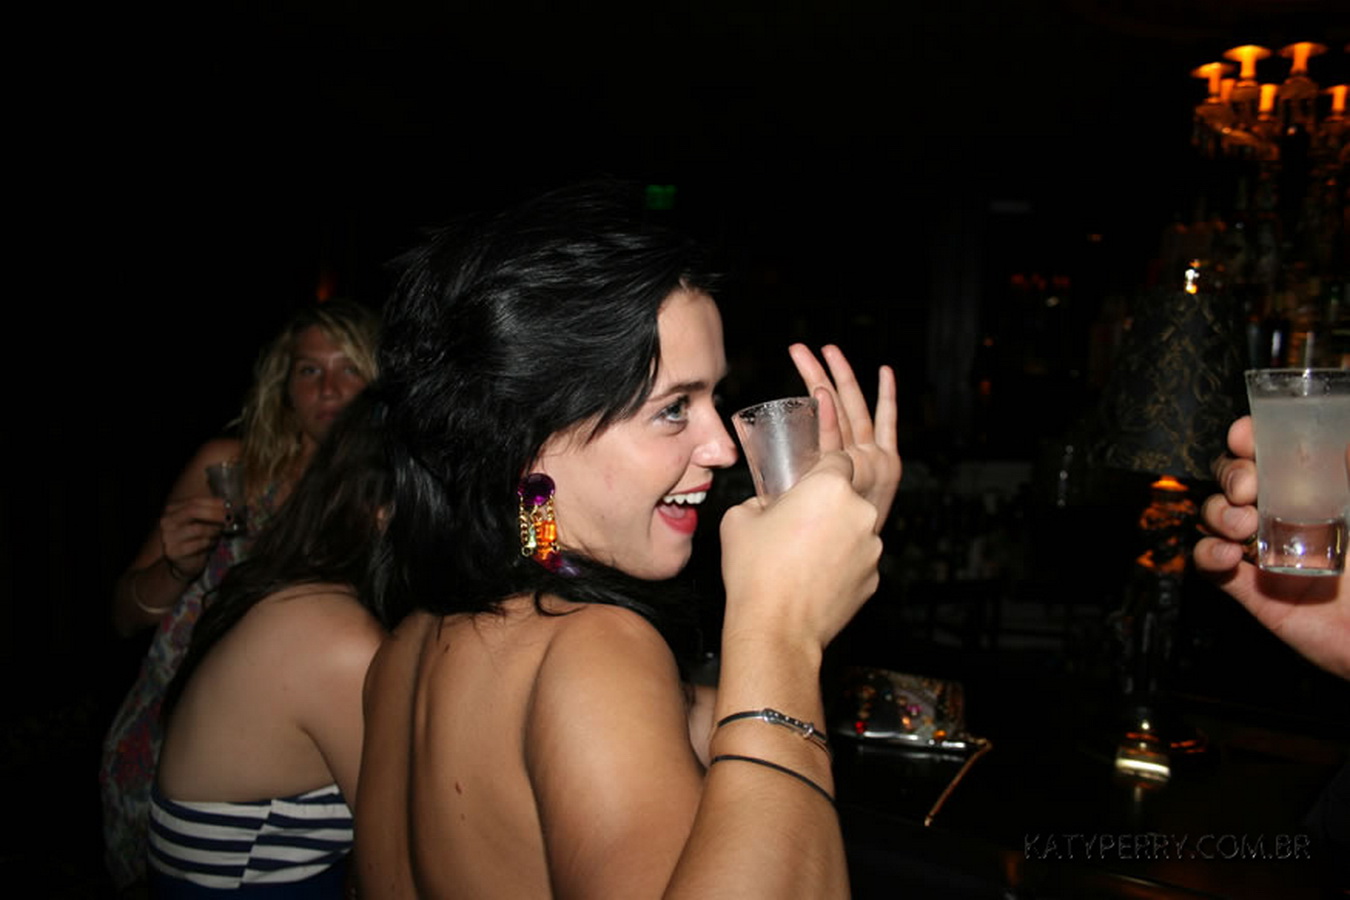 Katy_Perry_bobsslip_drunk_cleavage_downblouse_upskirt_nipslip_at_her_birthday_2007_party_99x_HQ_59.jpg